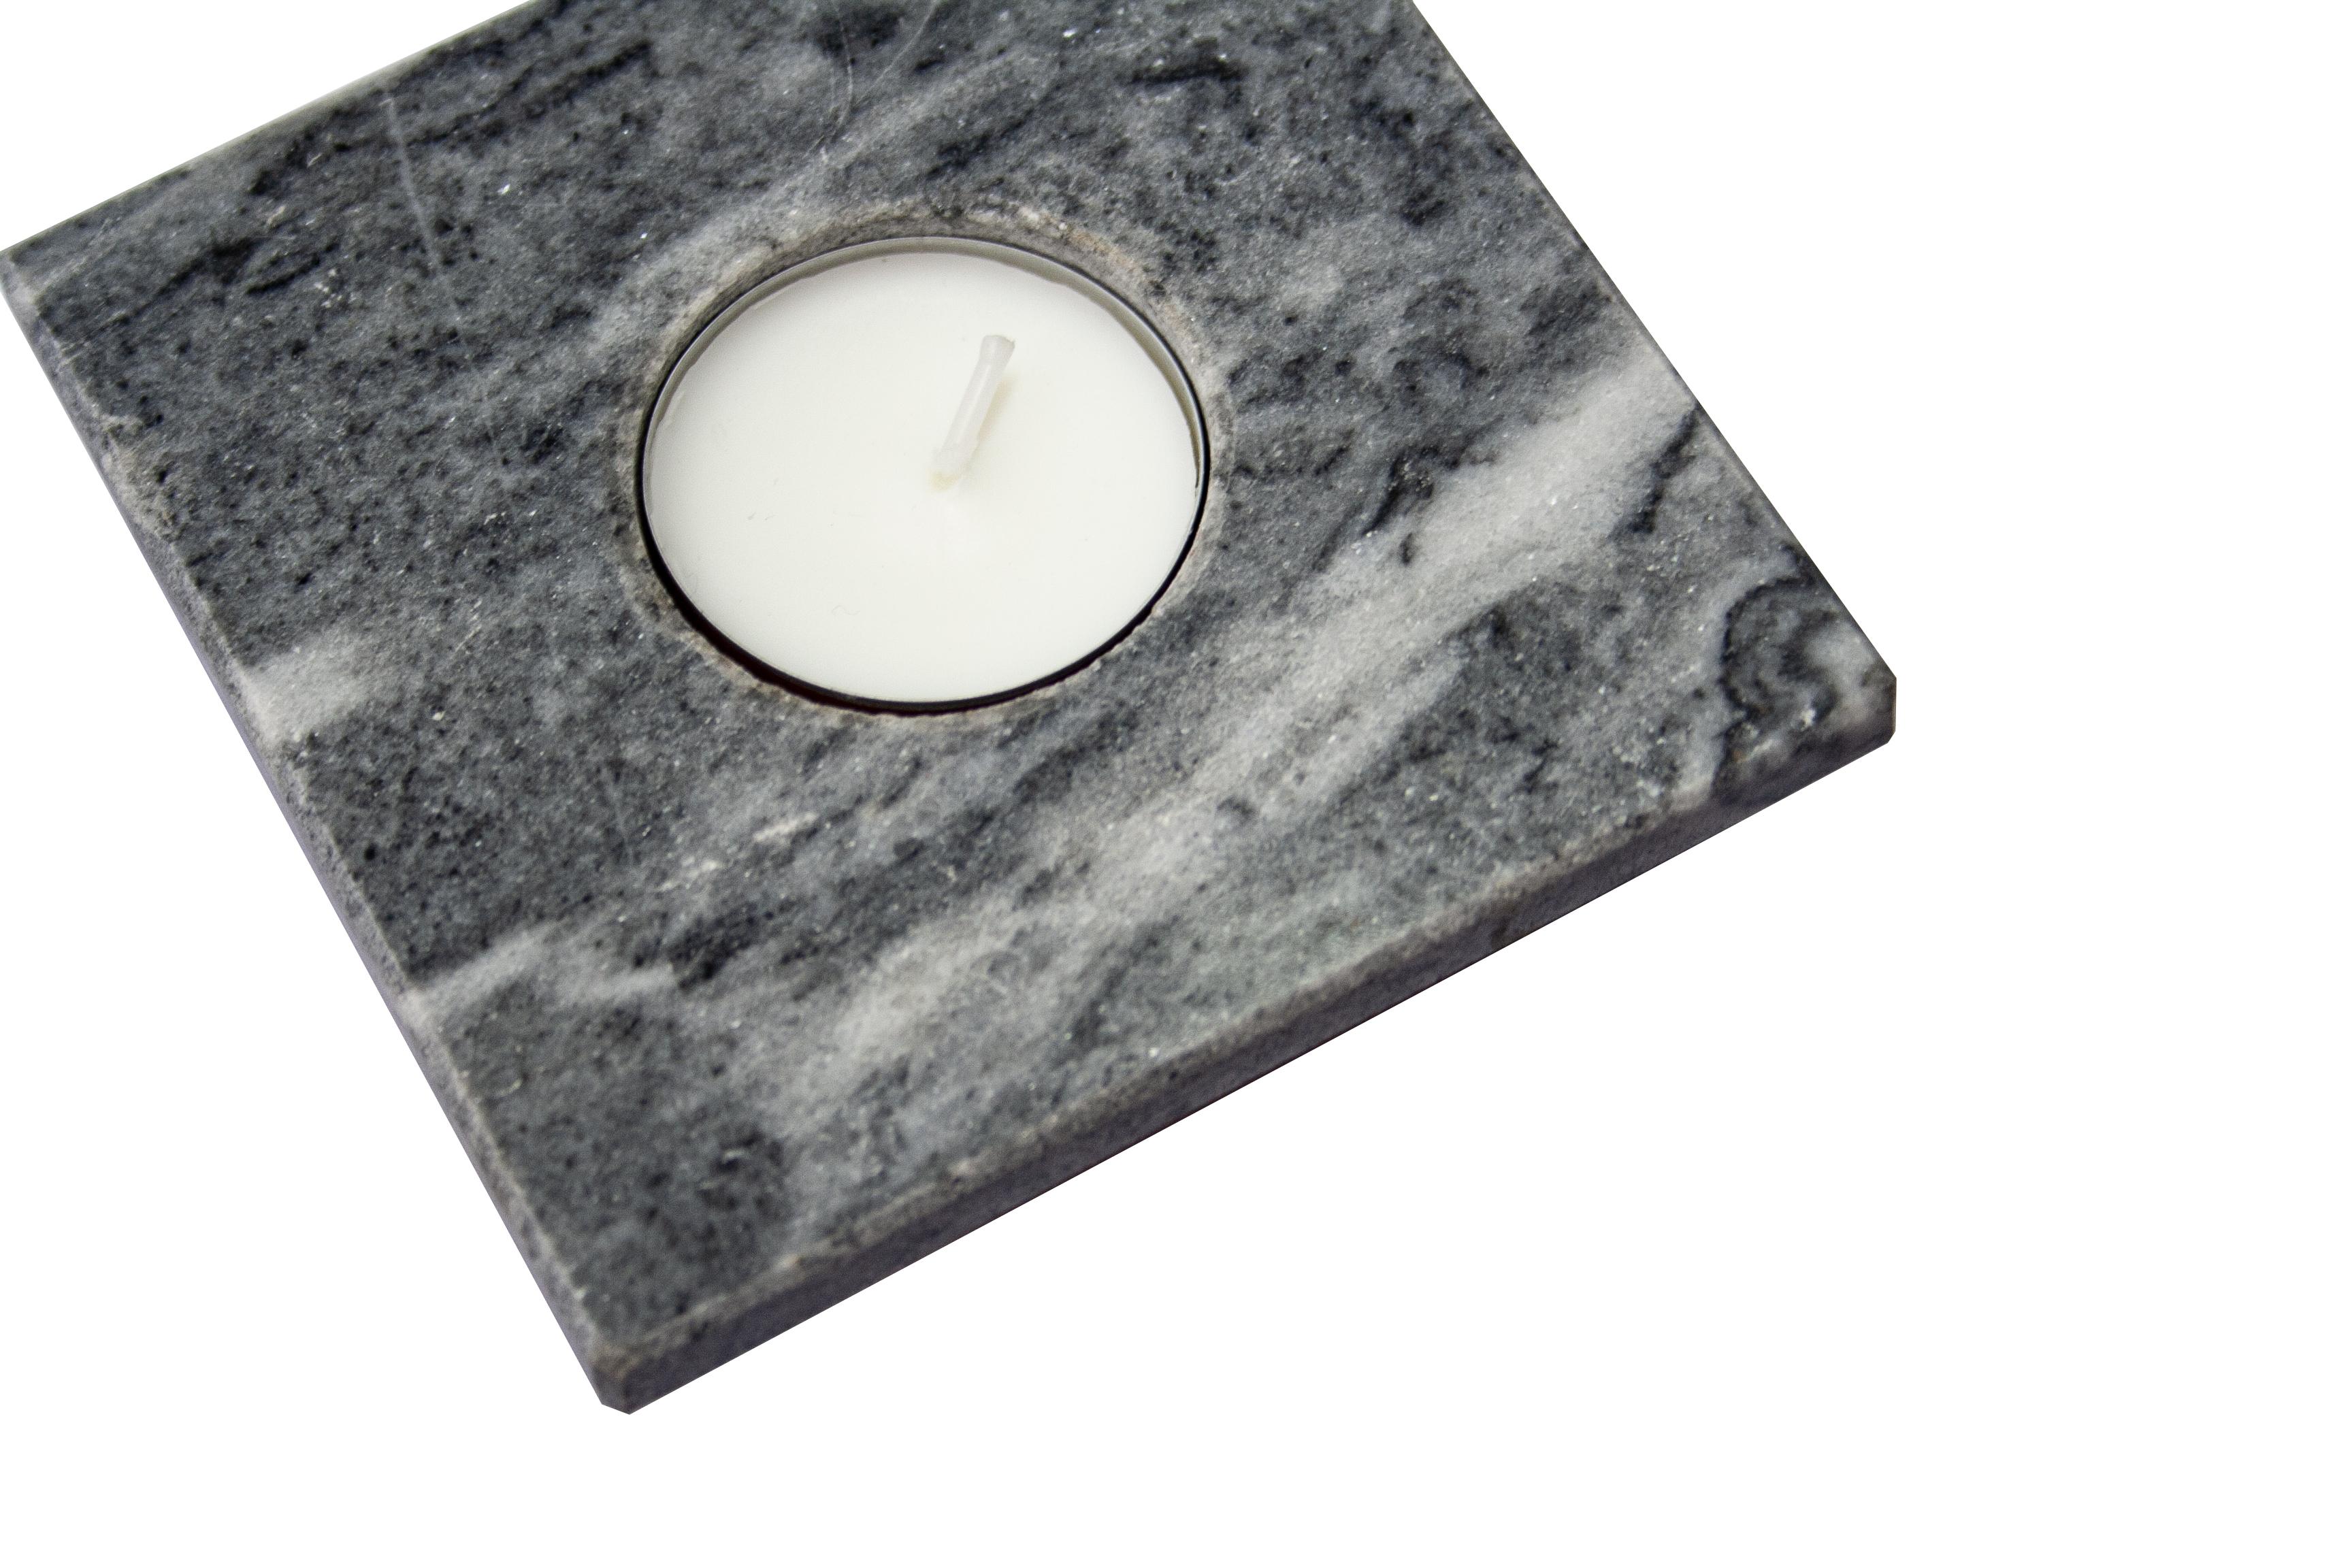 Polished Gray Marble Candle Holder White Veined  Contemporary Design Mother’s Day Gift For Sale